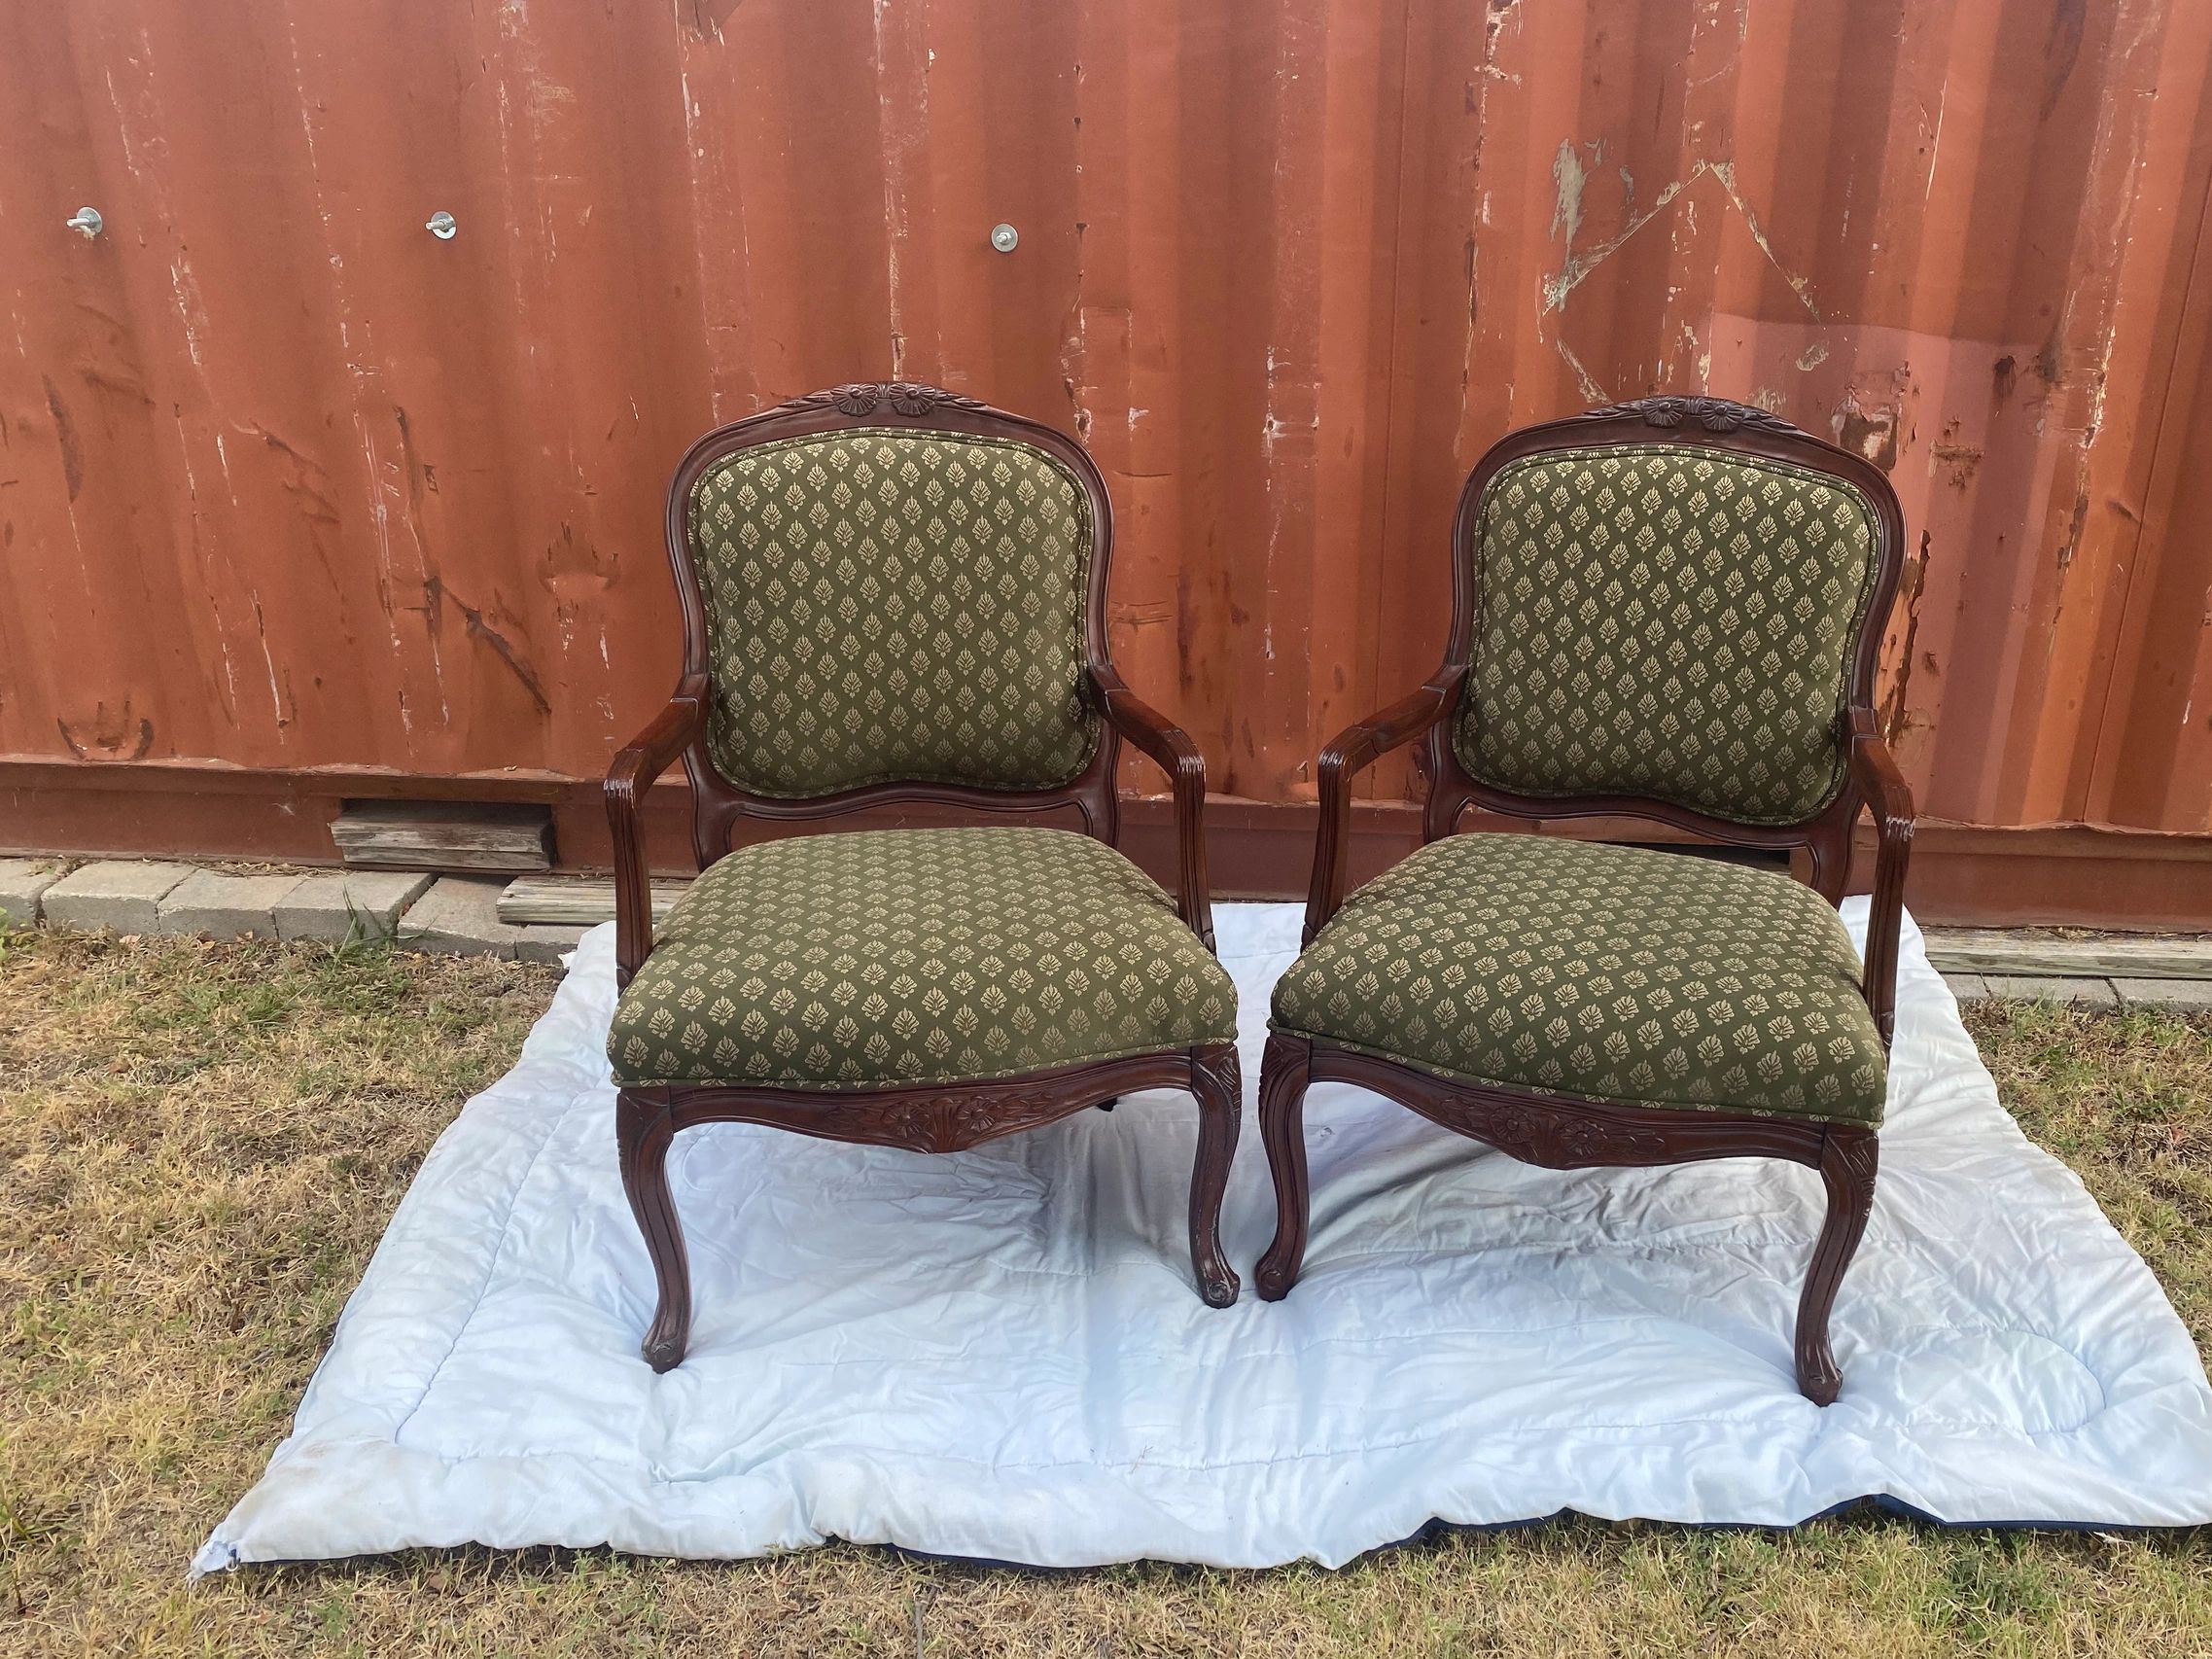 INV-001
(2) Brown chairs with green upholstery.   27 1/2 in. Wide by 38 in. High. We can change the 